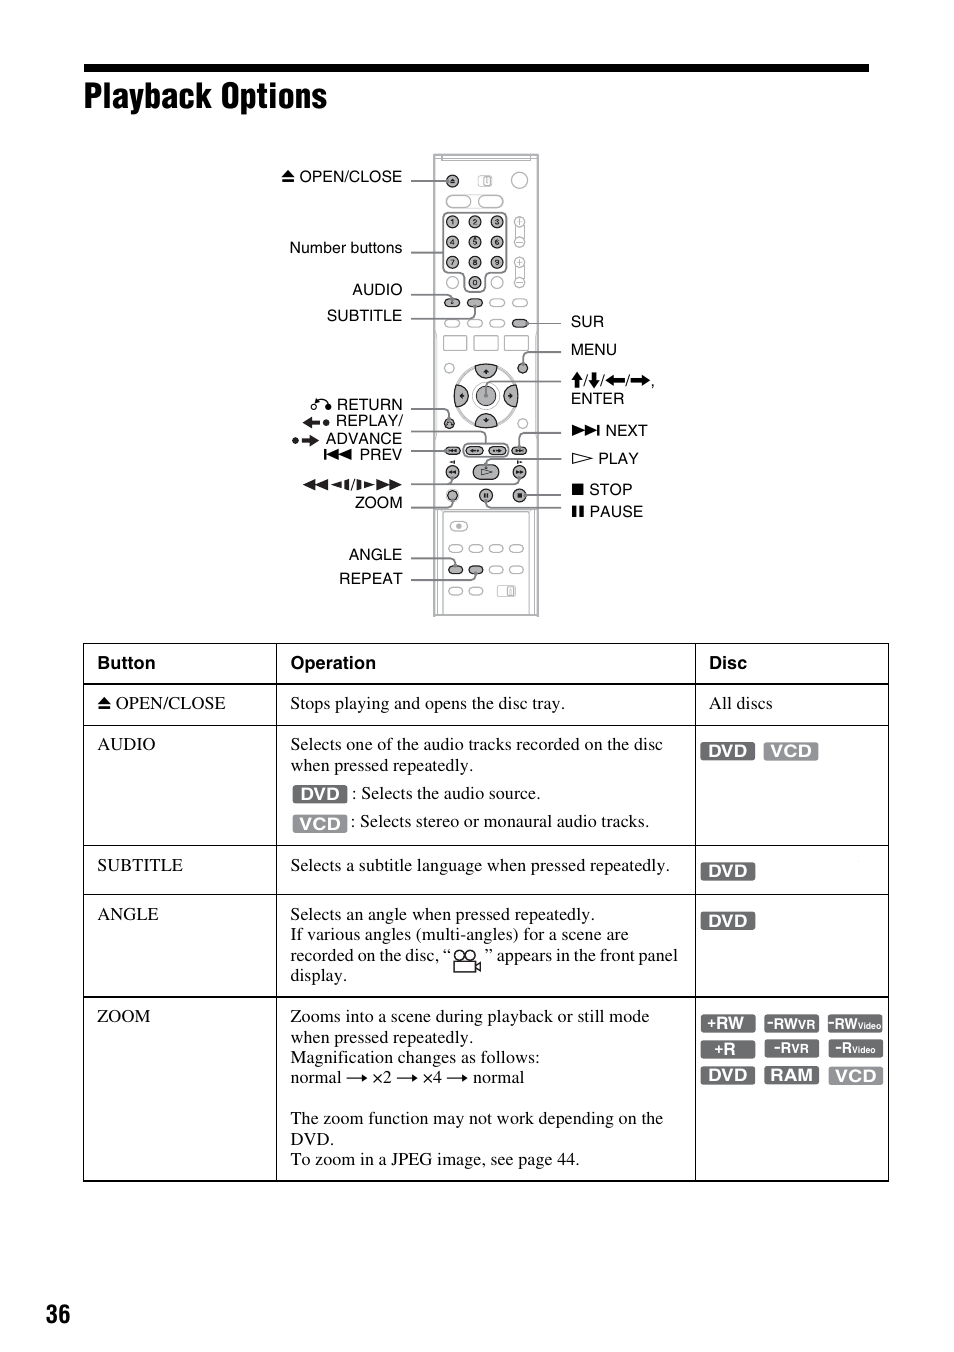 Playback options | Sony RDR-VX521 User Manual | Page 36 / 132